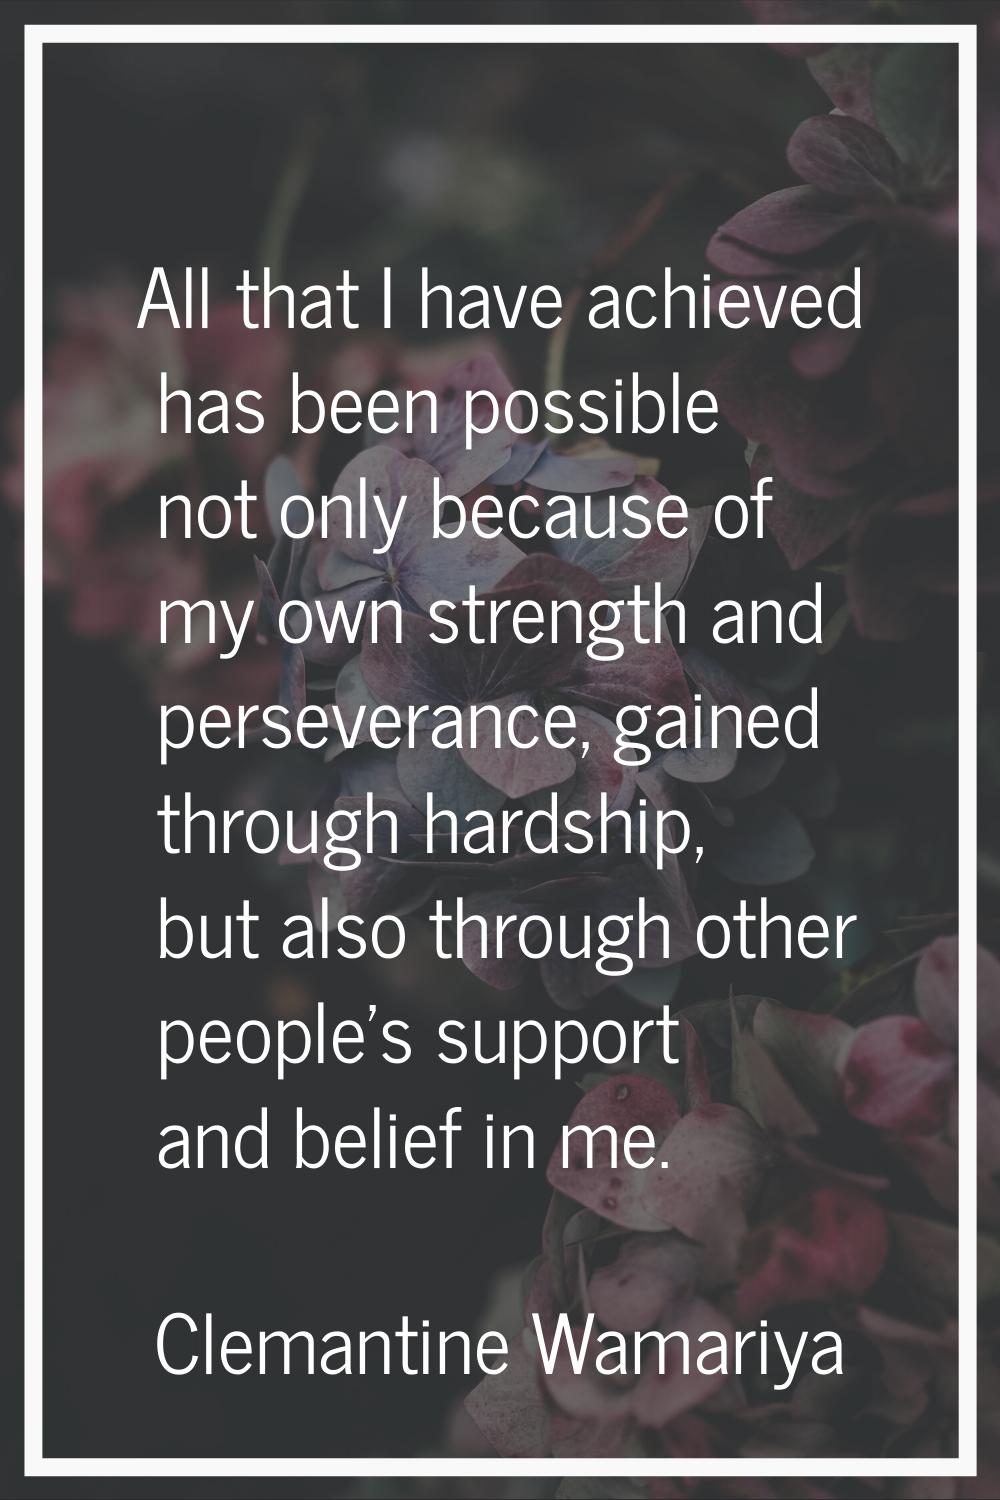 All that I have achieved has been possible not only because of my own strength and perseverance, ga